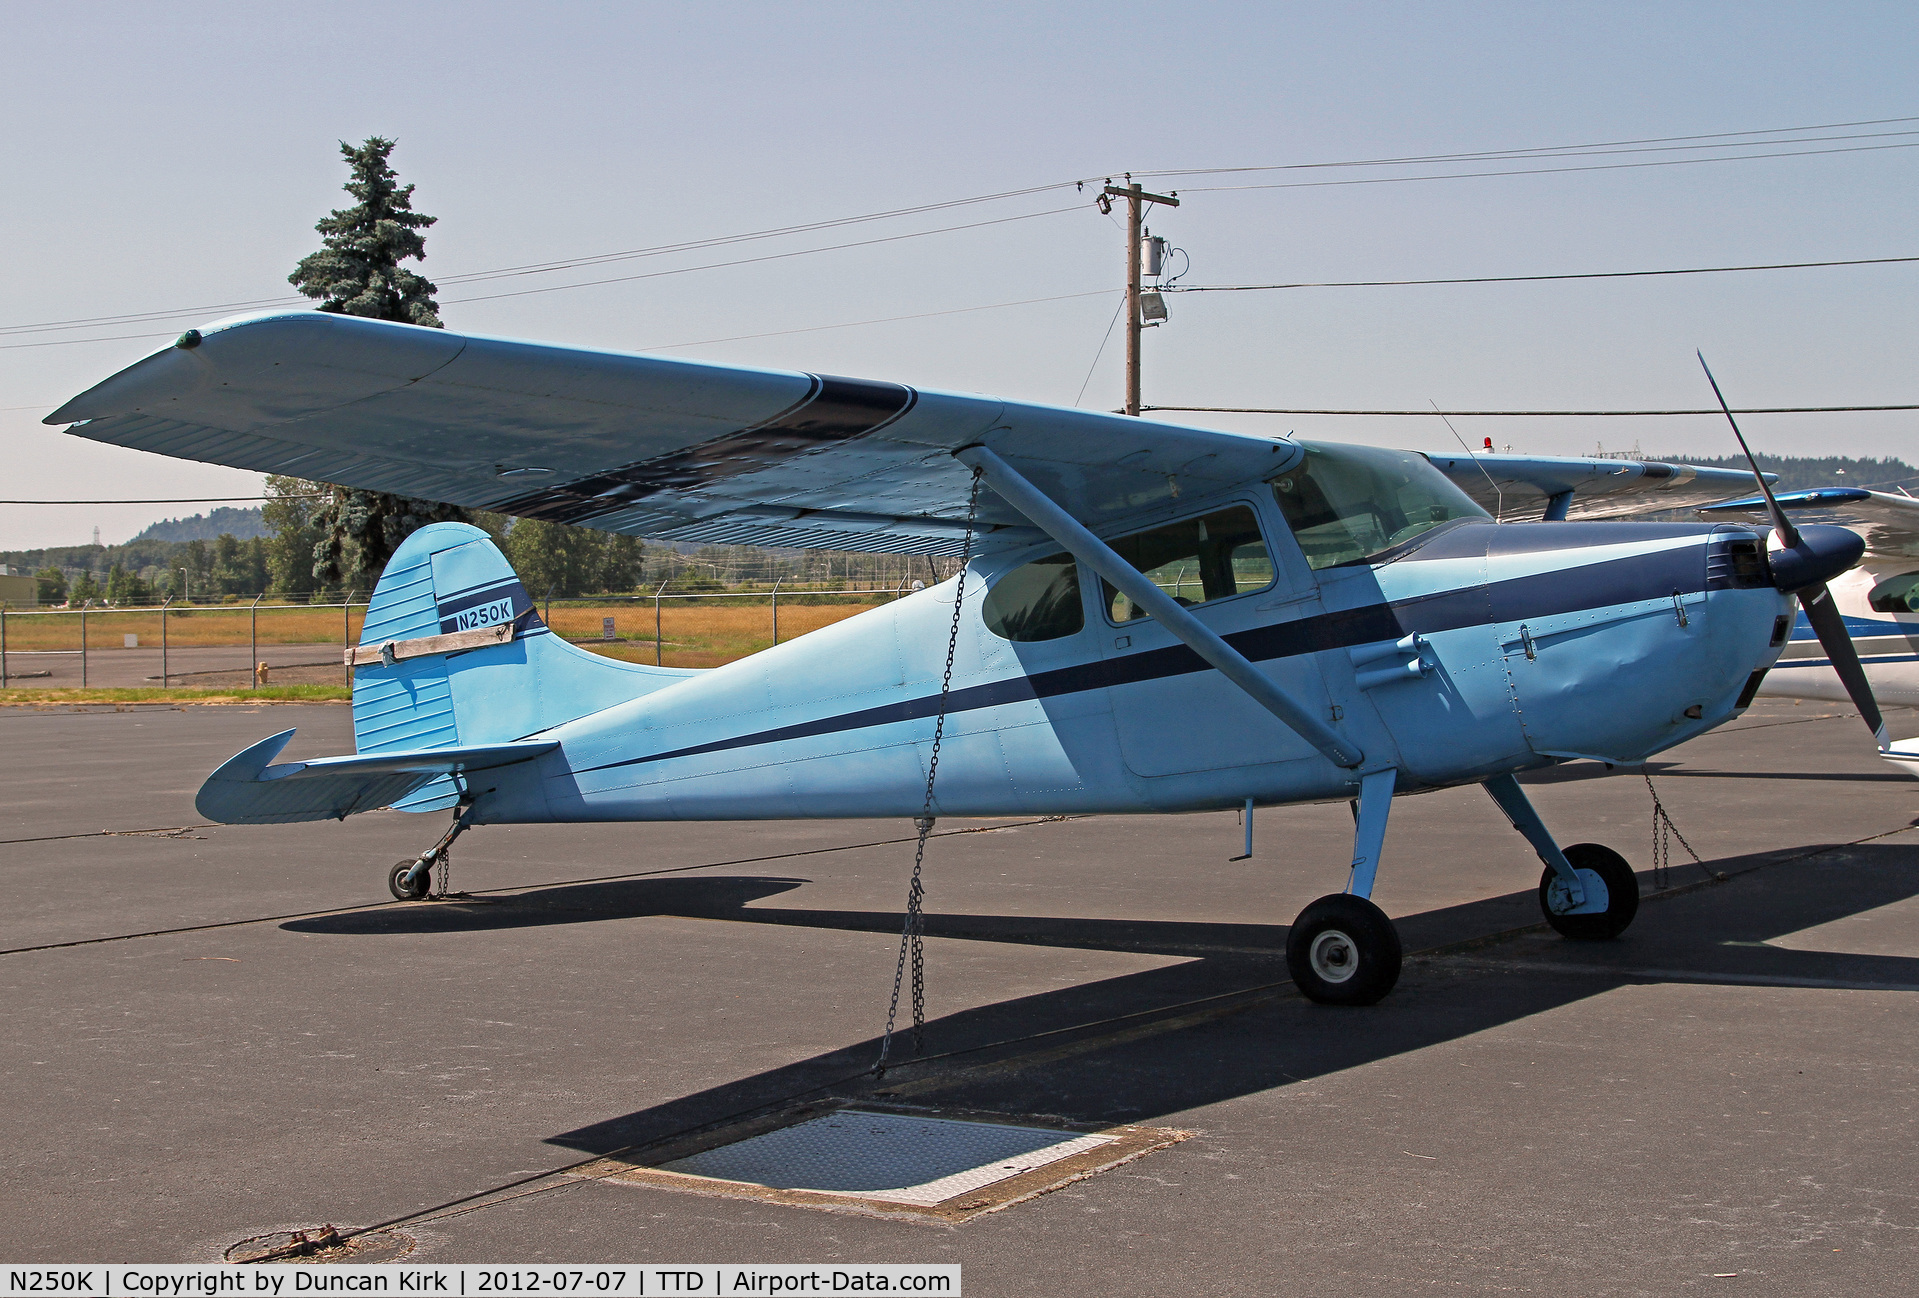 N250K, 1952 Cessna 170B C/N 20659, Sixty years old and still going strong!